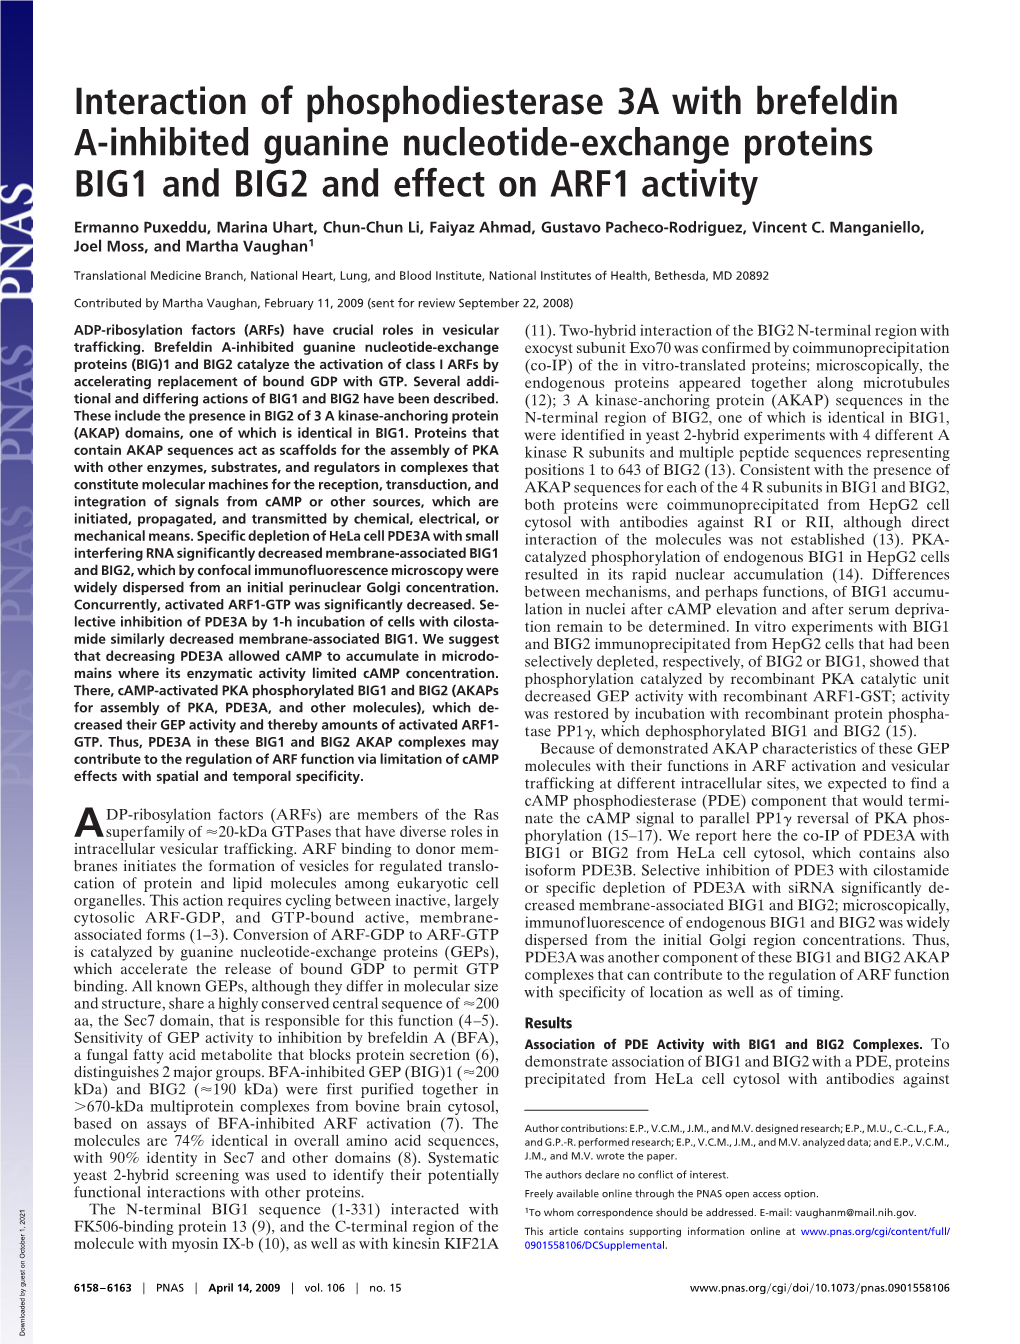 Interaction of Phosphodiesterase 3A with Brefeldin A-Inhibited Guanine Nucleotide-Exchange Proteins BIG1 and BIG2 and Effect on ARF1 Activity